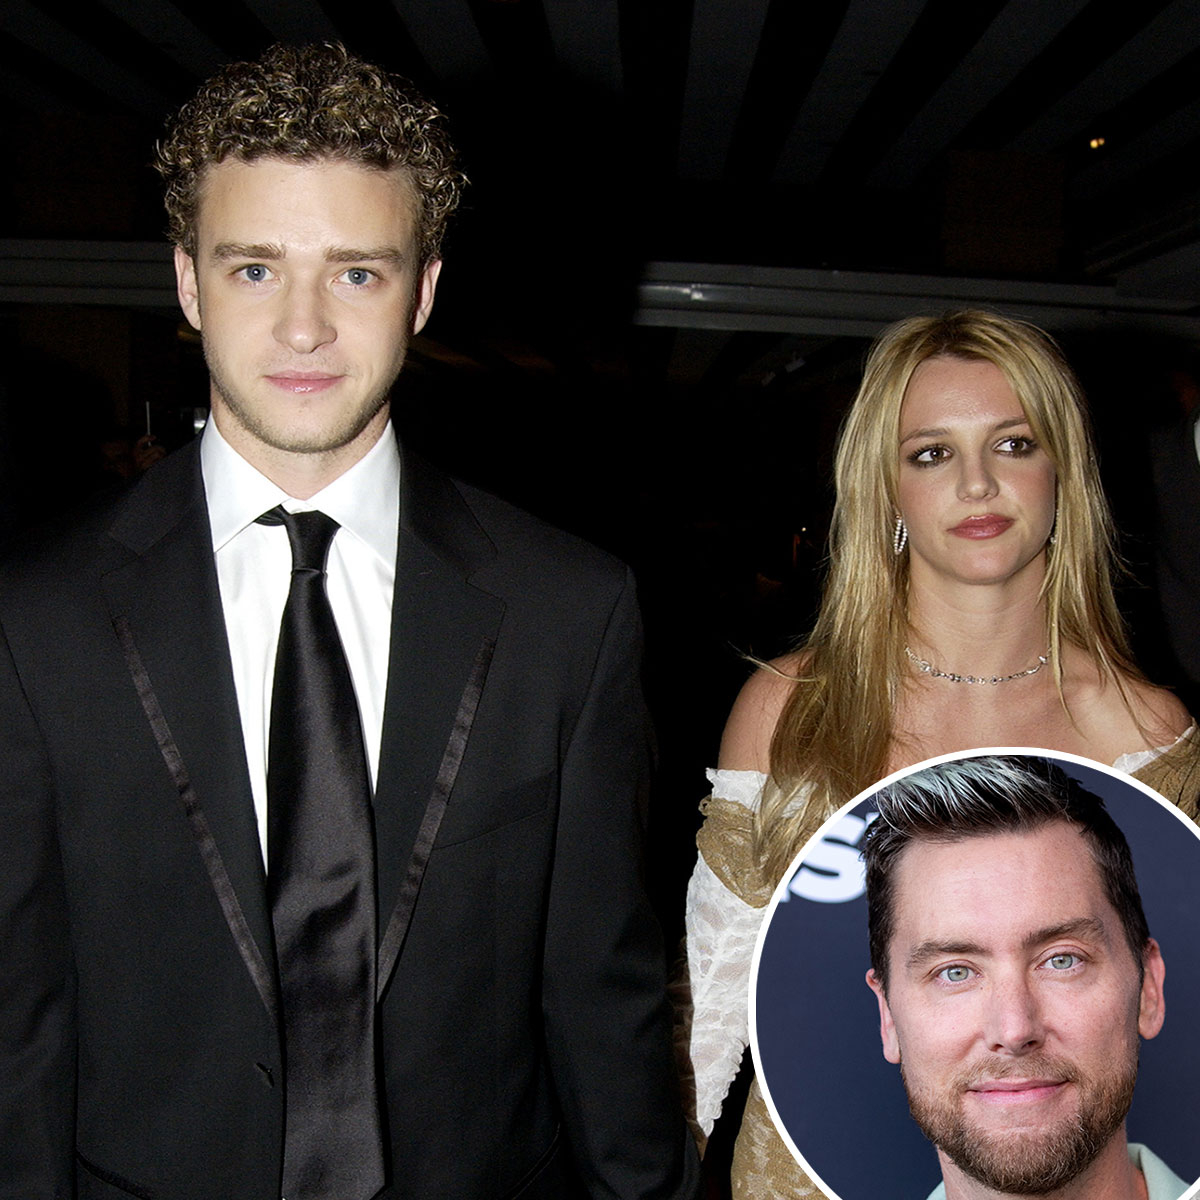 Lance Bass Hopes Fans Will 'Find Forgiveness' for Justin Timberlake